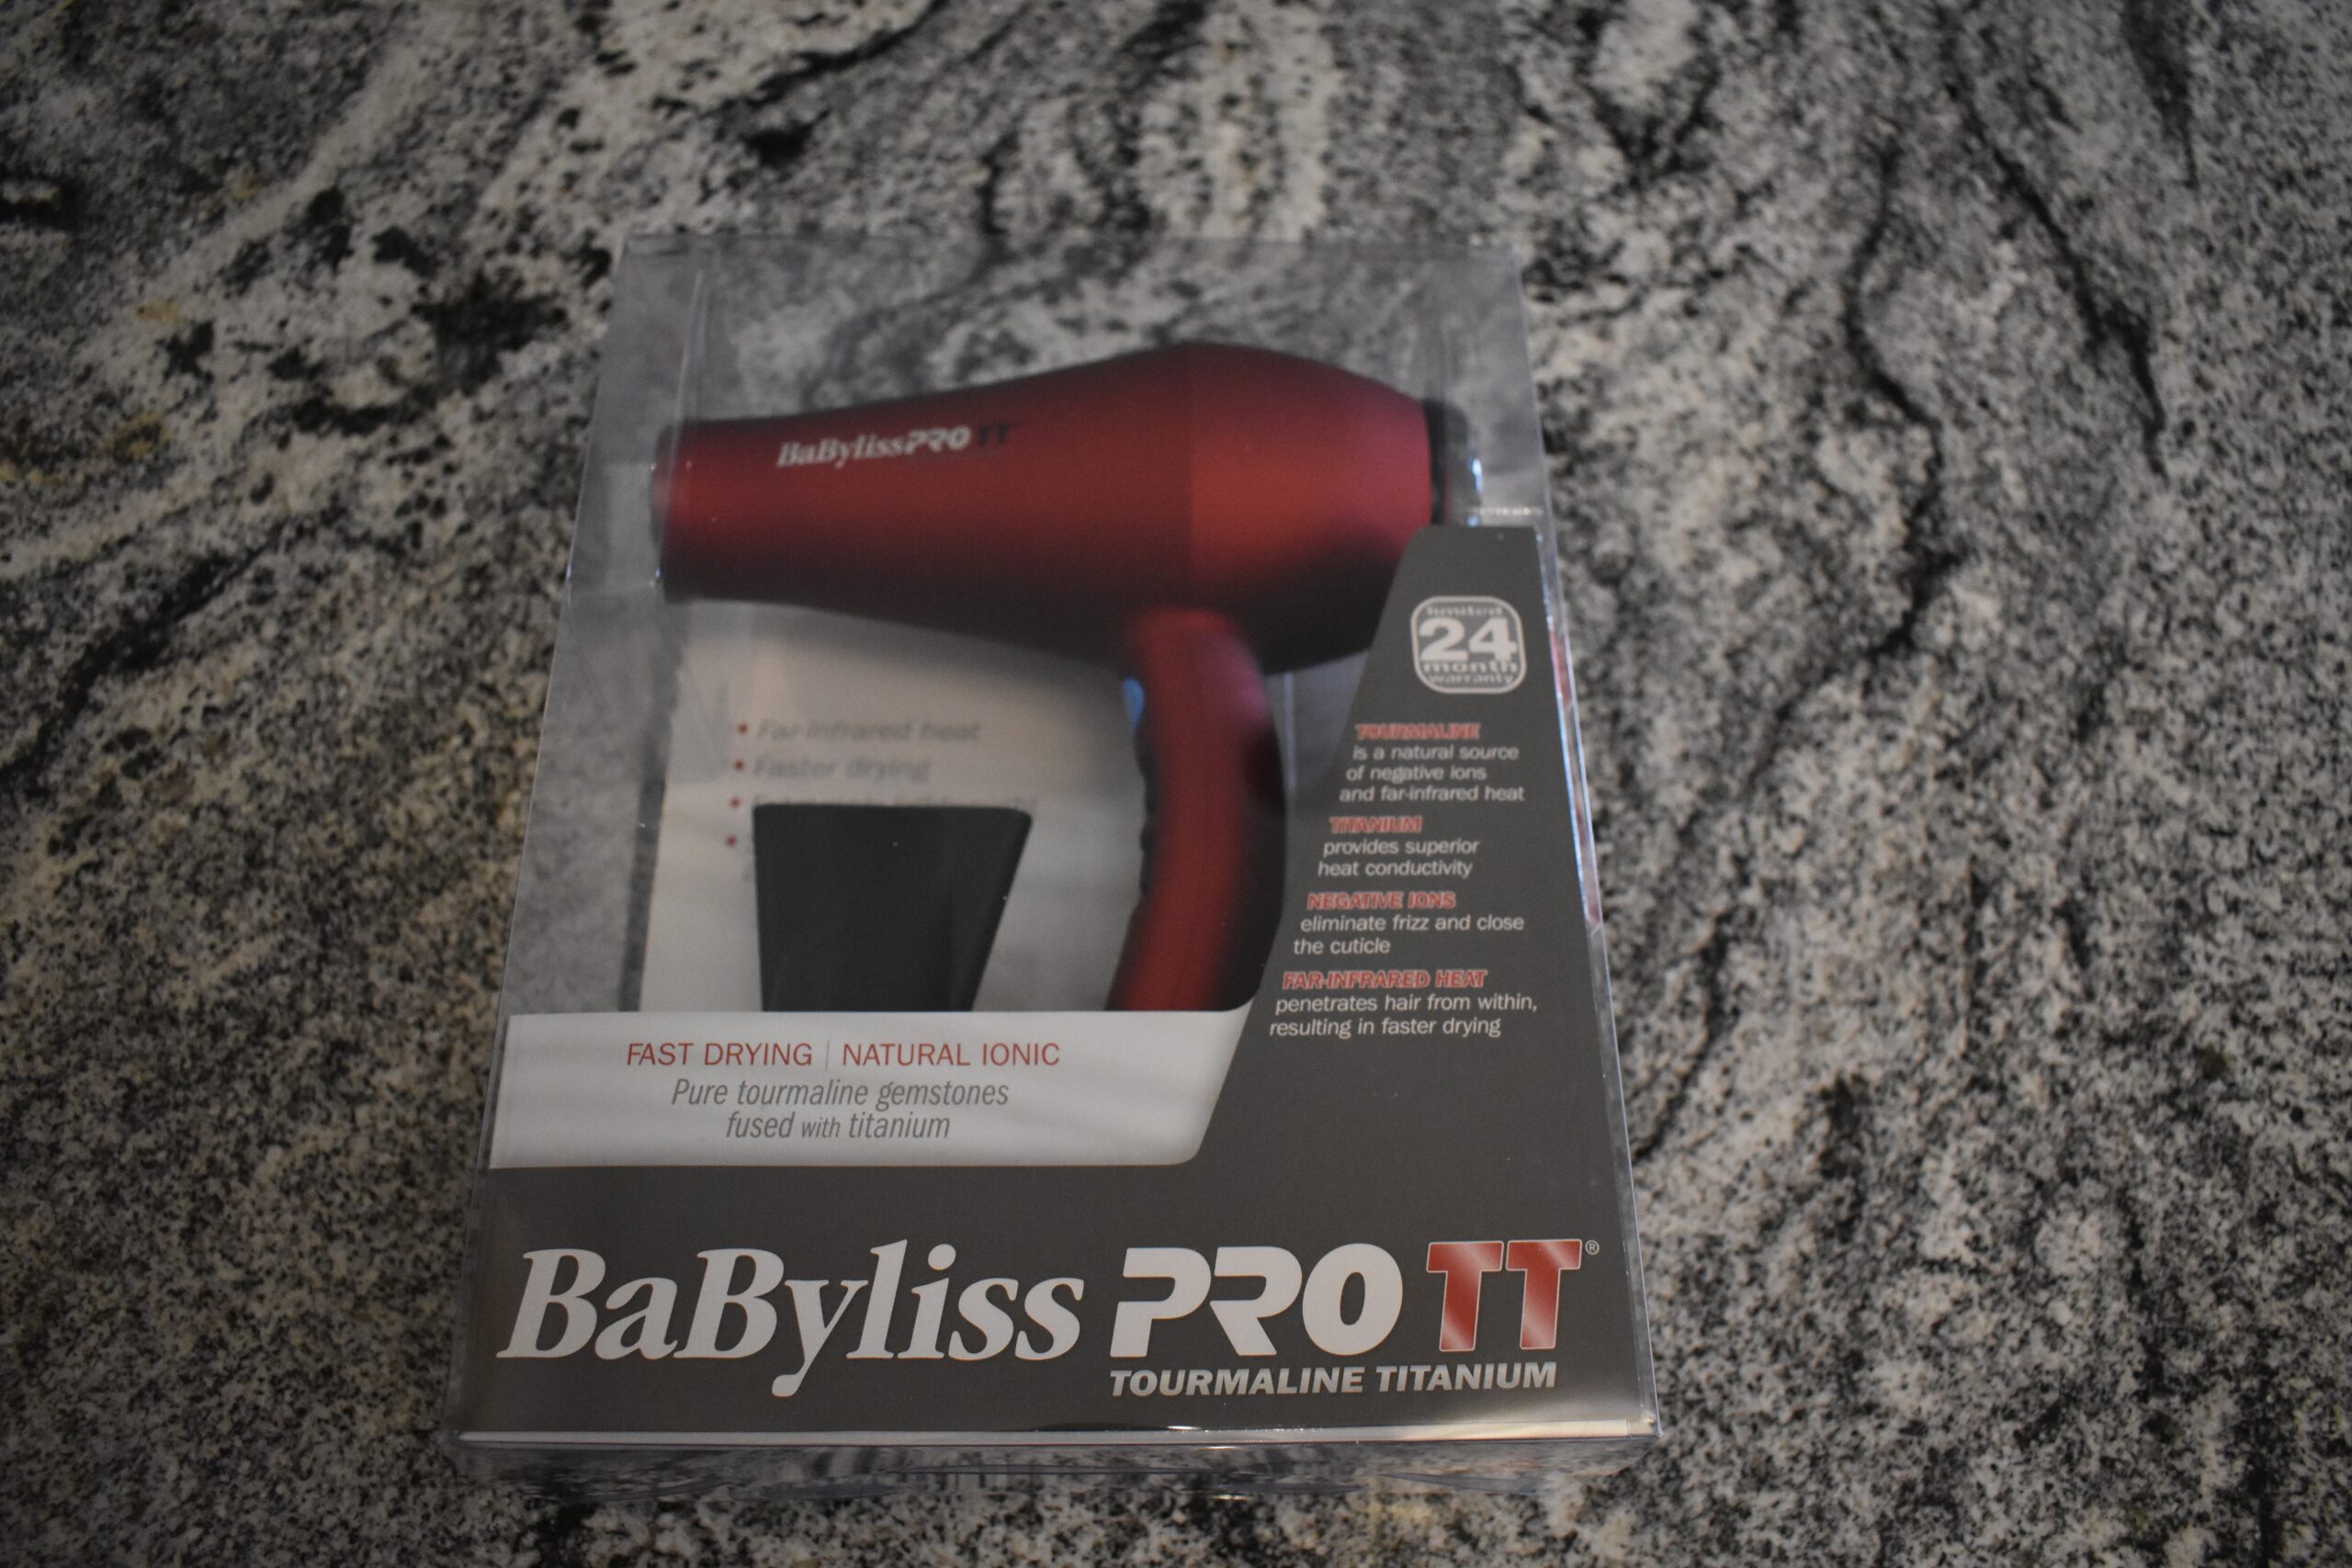 Babyliss pro tt in its transparent box on a counter